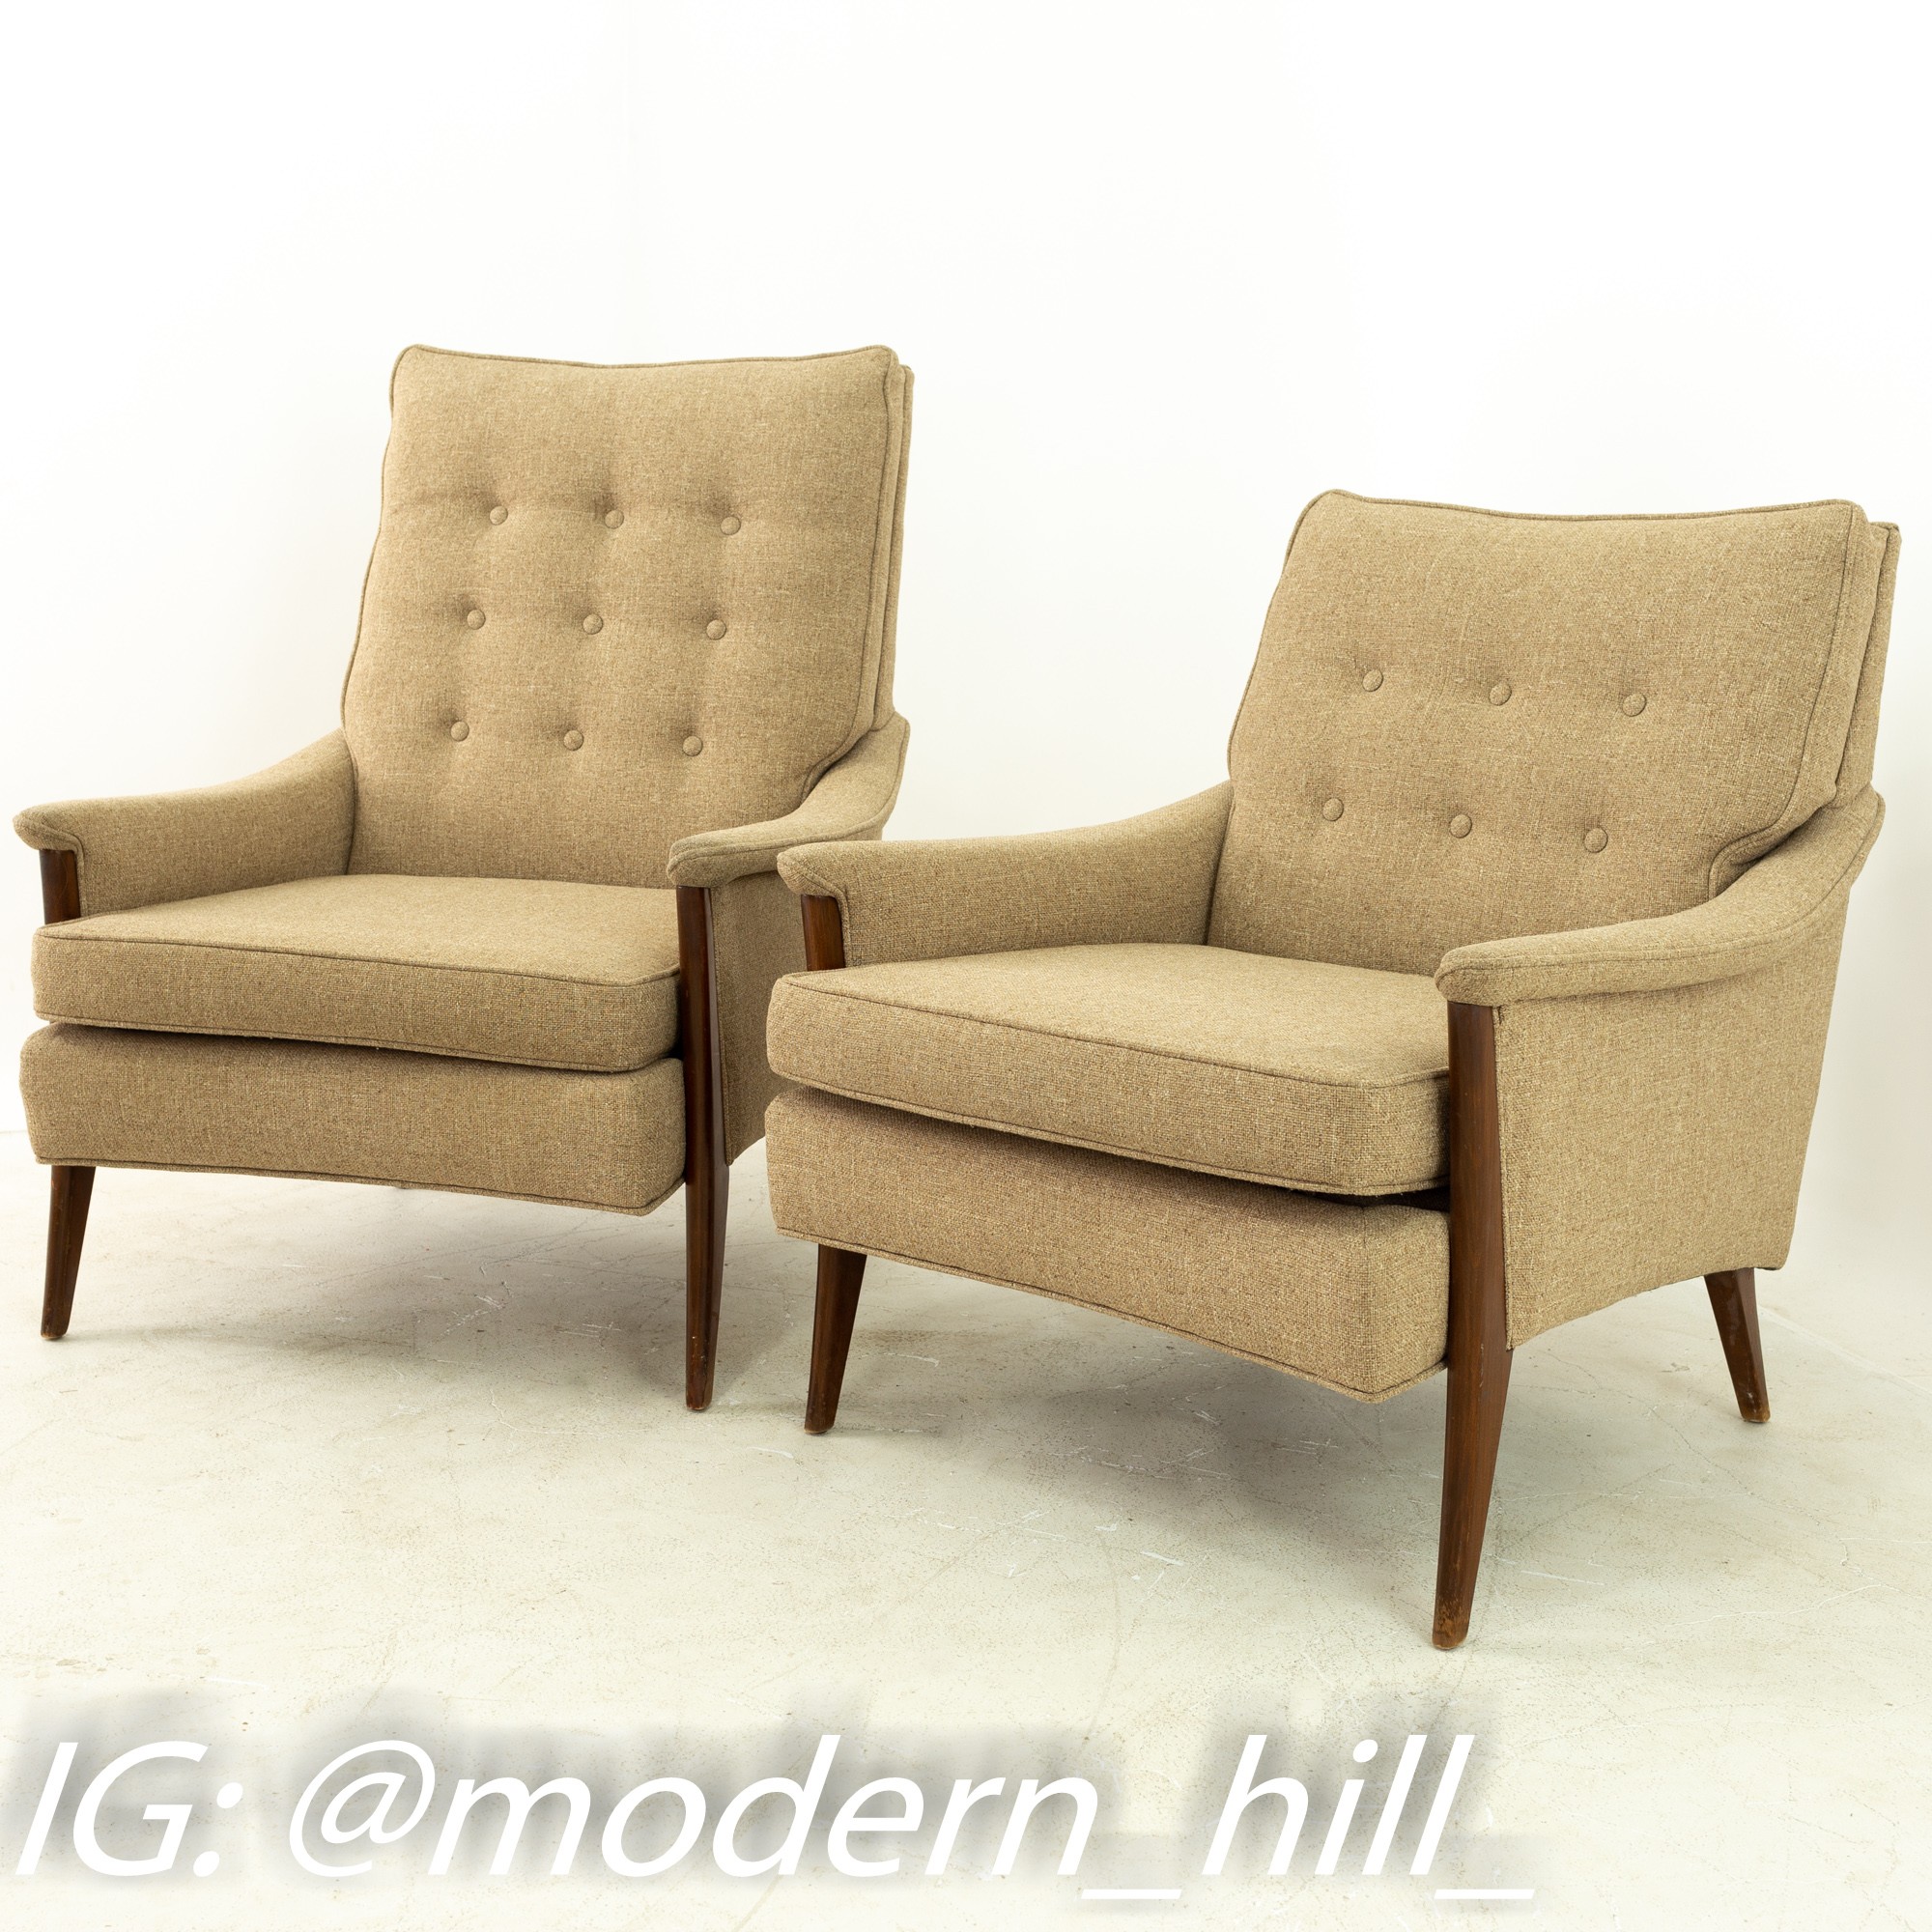 Milo Baughman Style Mid Century His and Her's Lounge Chairs - Pair